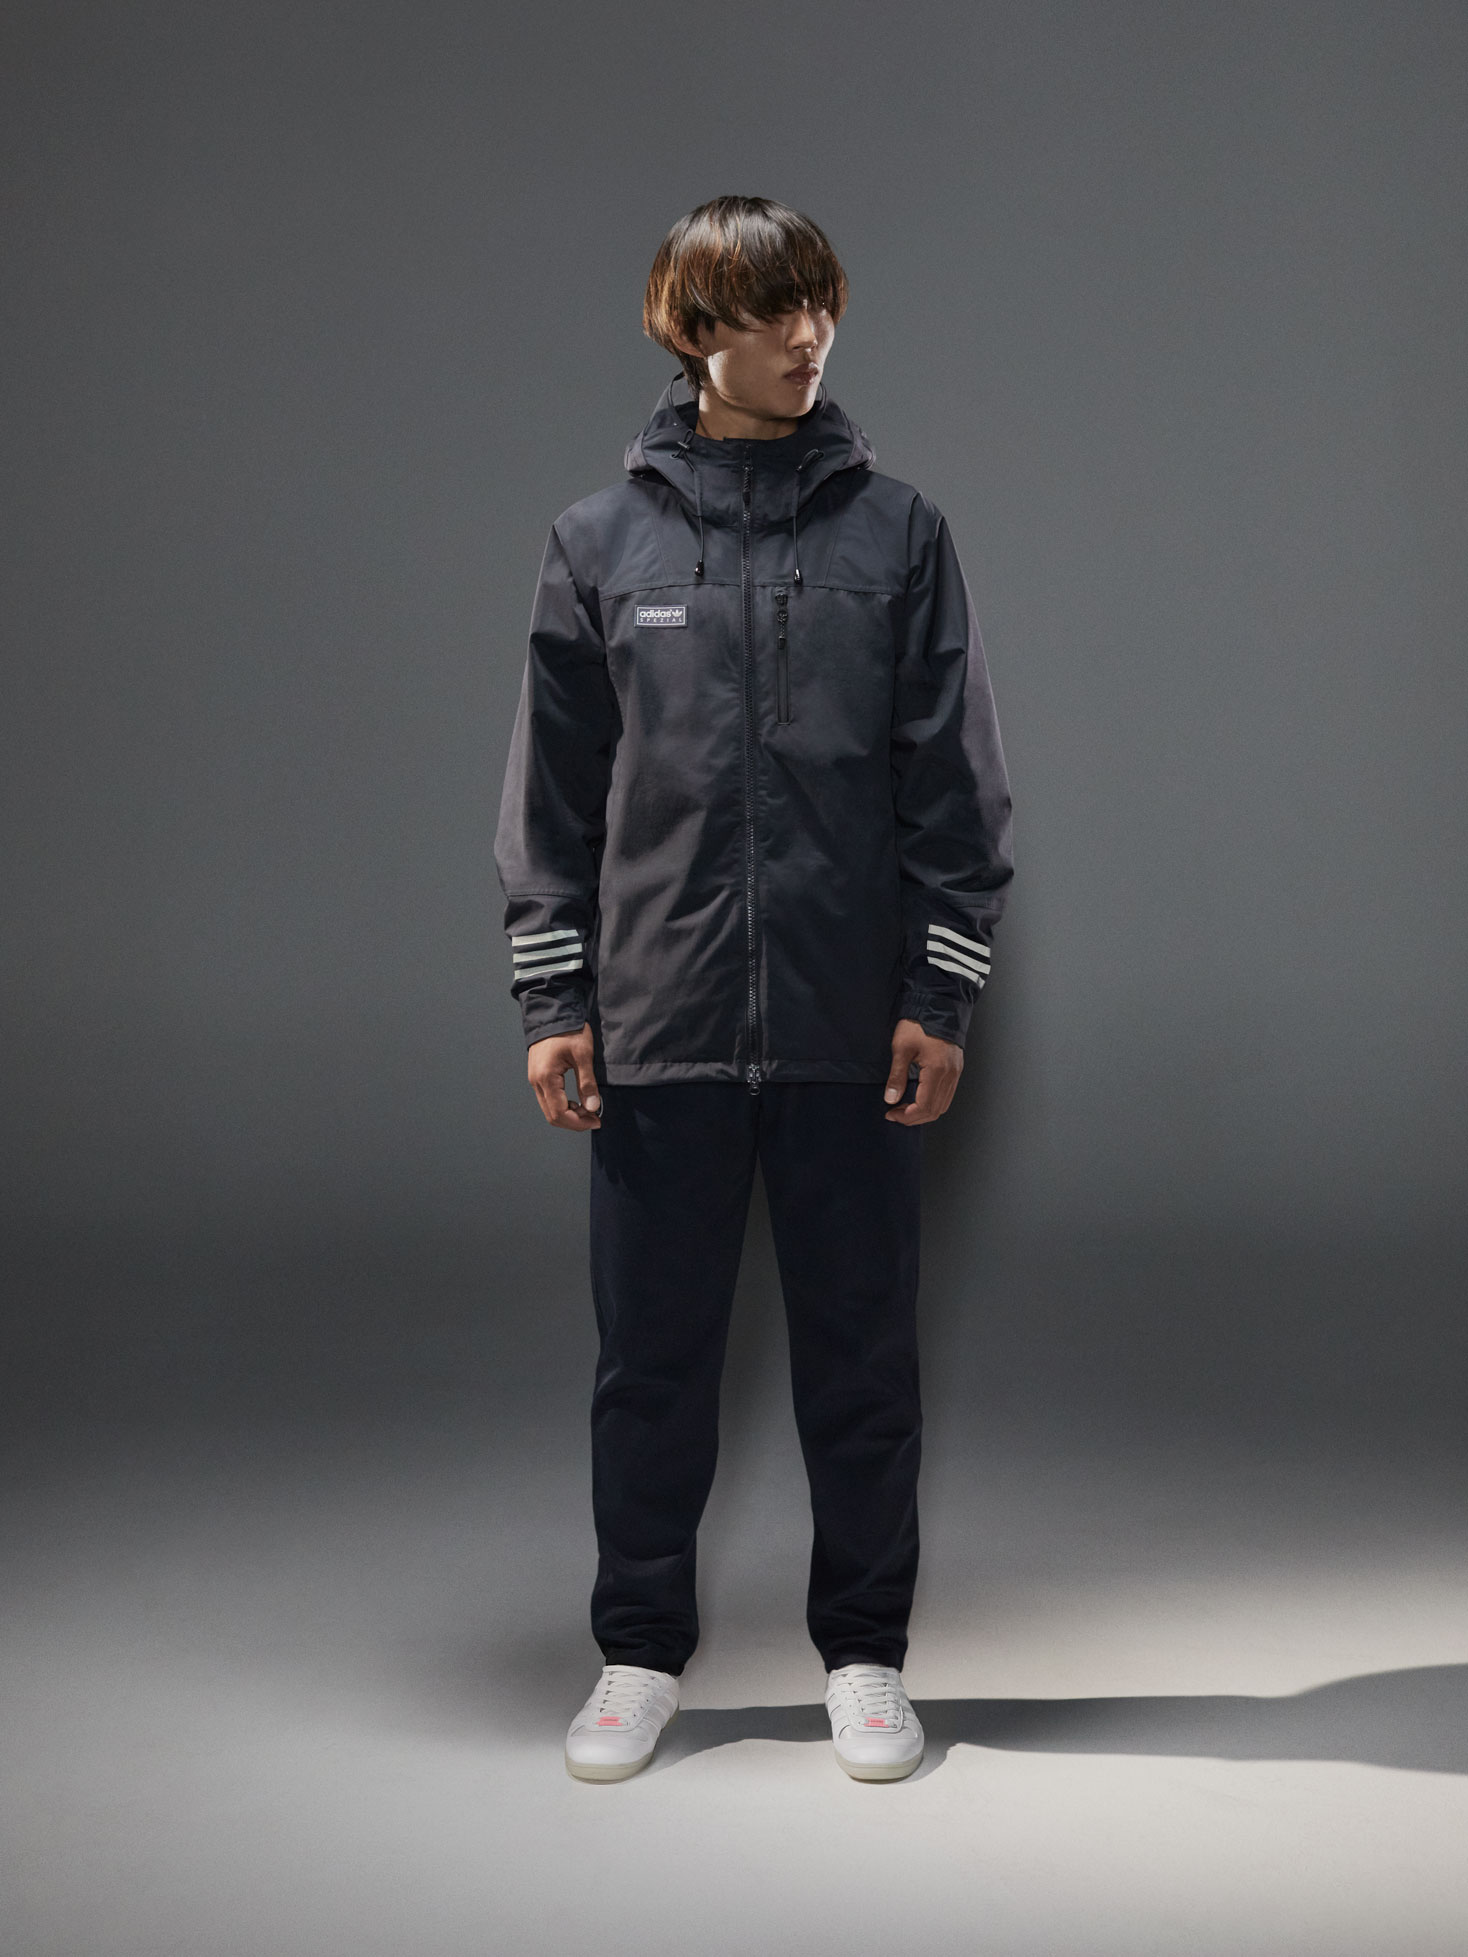 adidas Spezial + New Order - THE FALL